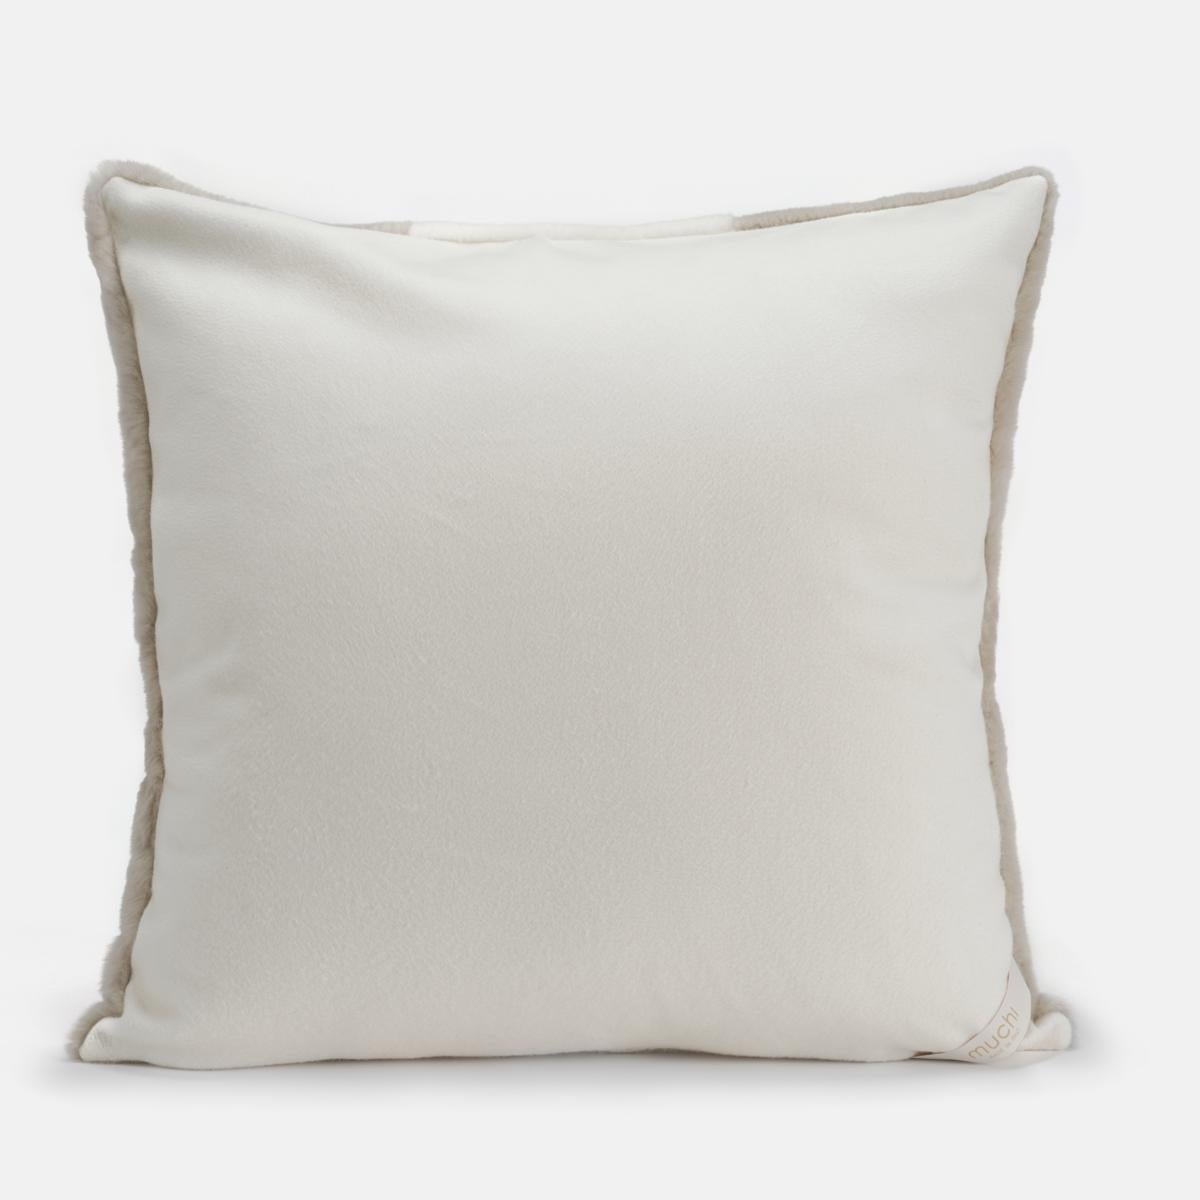 A South American Beaver cushion with a fluffy, generously-sized pile combining creamy-white with a cachà to create an alternating stripe pattern.

Perfect for large sofas and soft colours, where it will blend in and attract guests without being